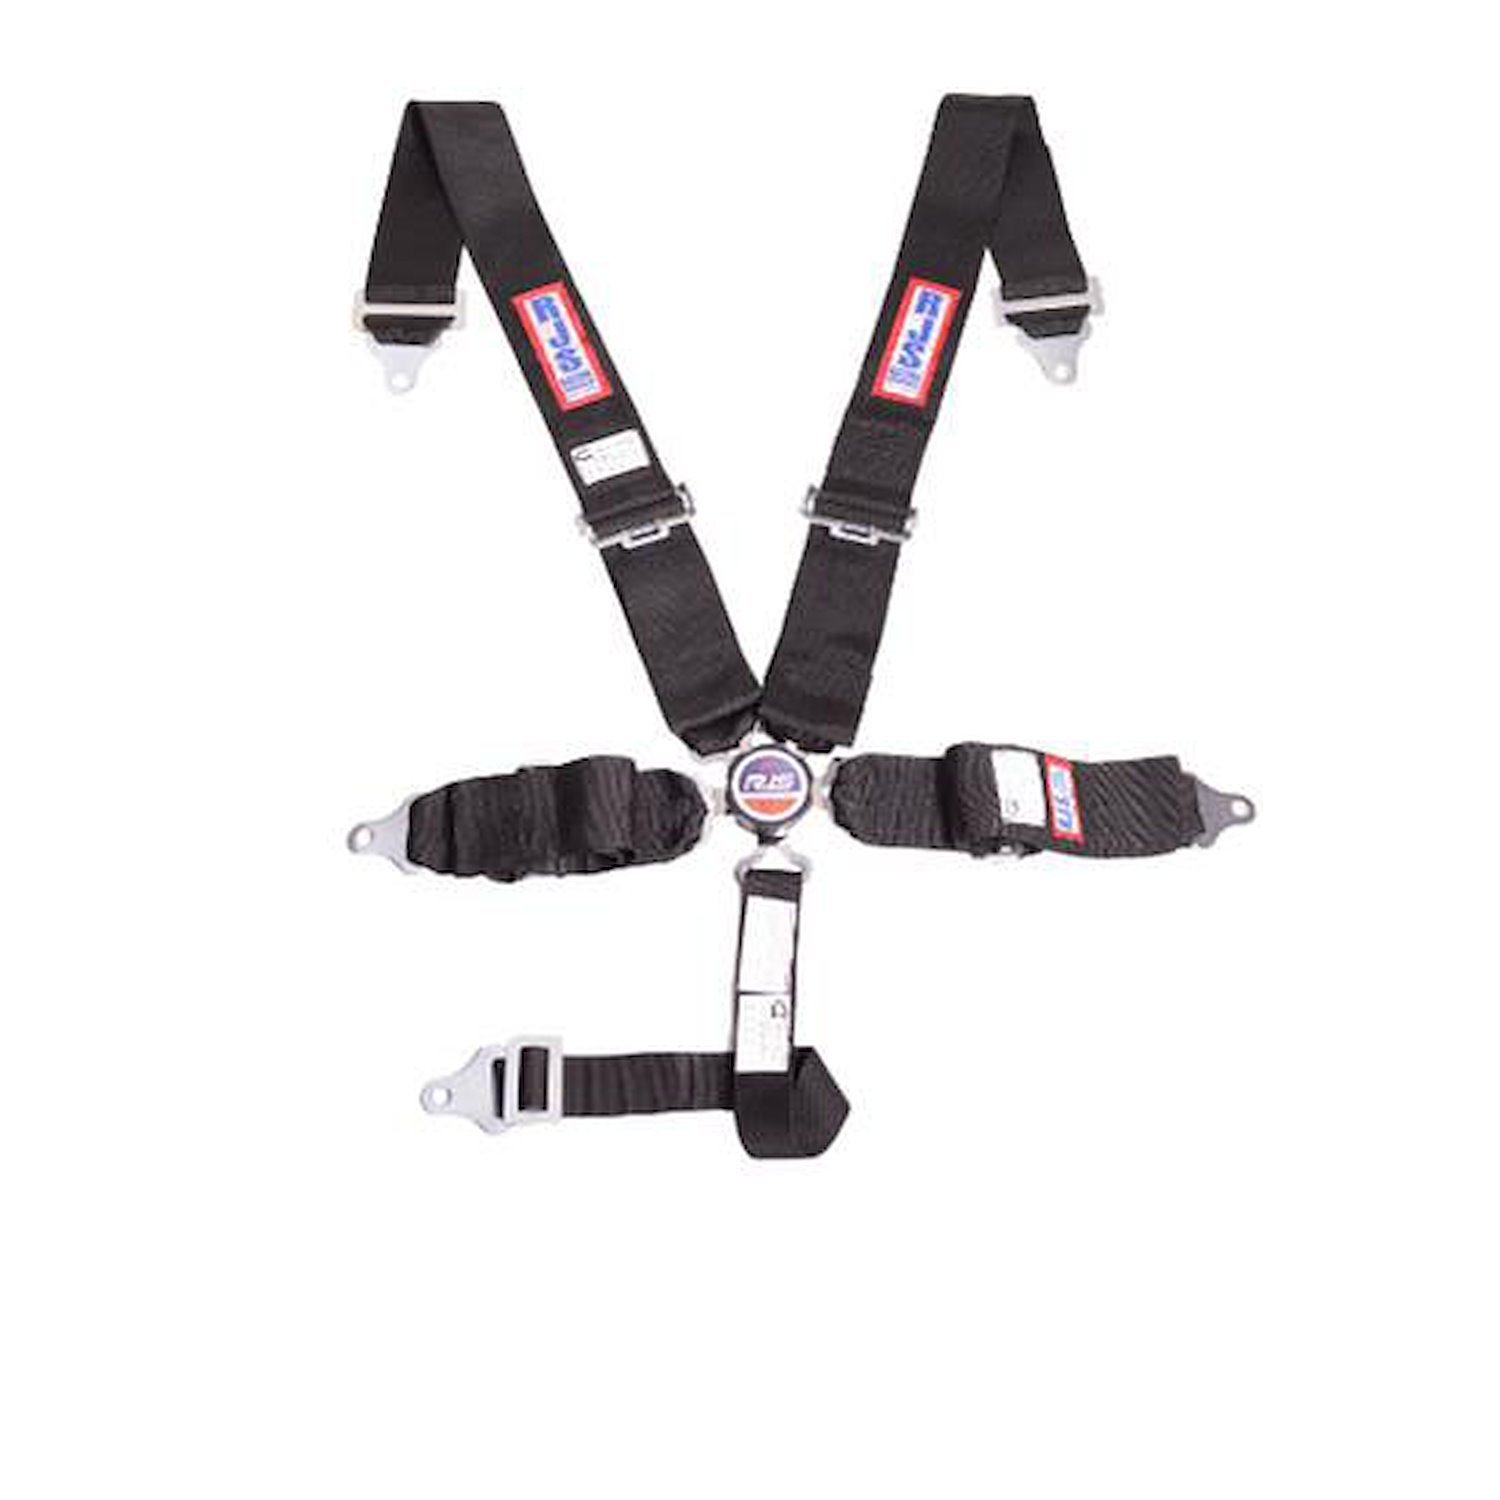 SFI 16.1 CAM-LOCK HARNESS 3 PULL DOWN Lap Belt 3 Shoulder Harness Individual FLOOR Mount 3 SINGLE Sub ALL WRAP ENDS BLUE